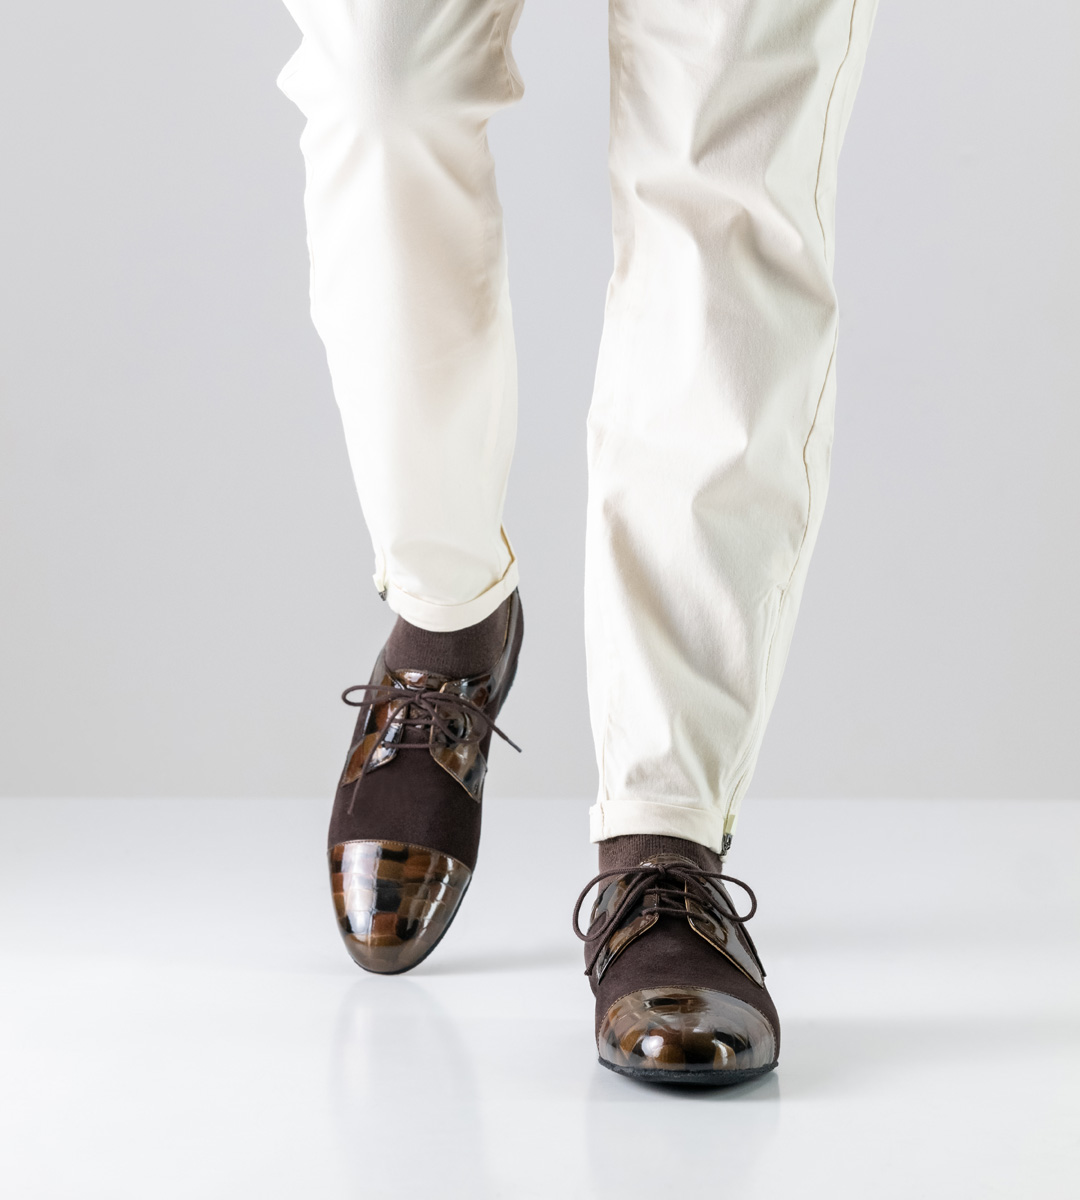 Light chino in combination with brown Werner Kern men's dance shoe